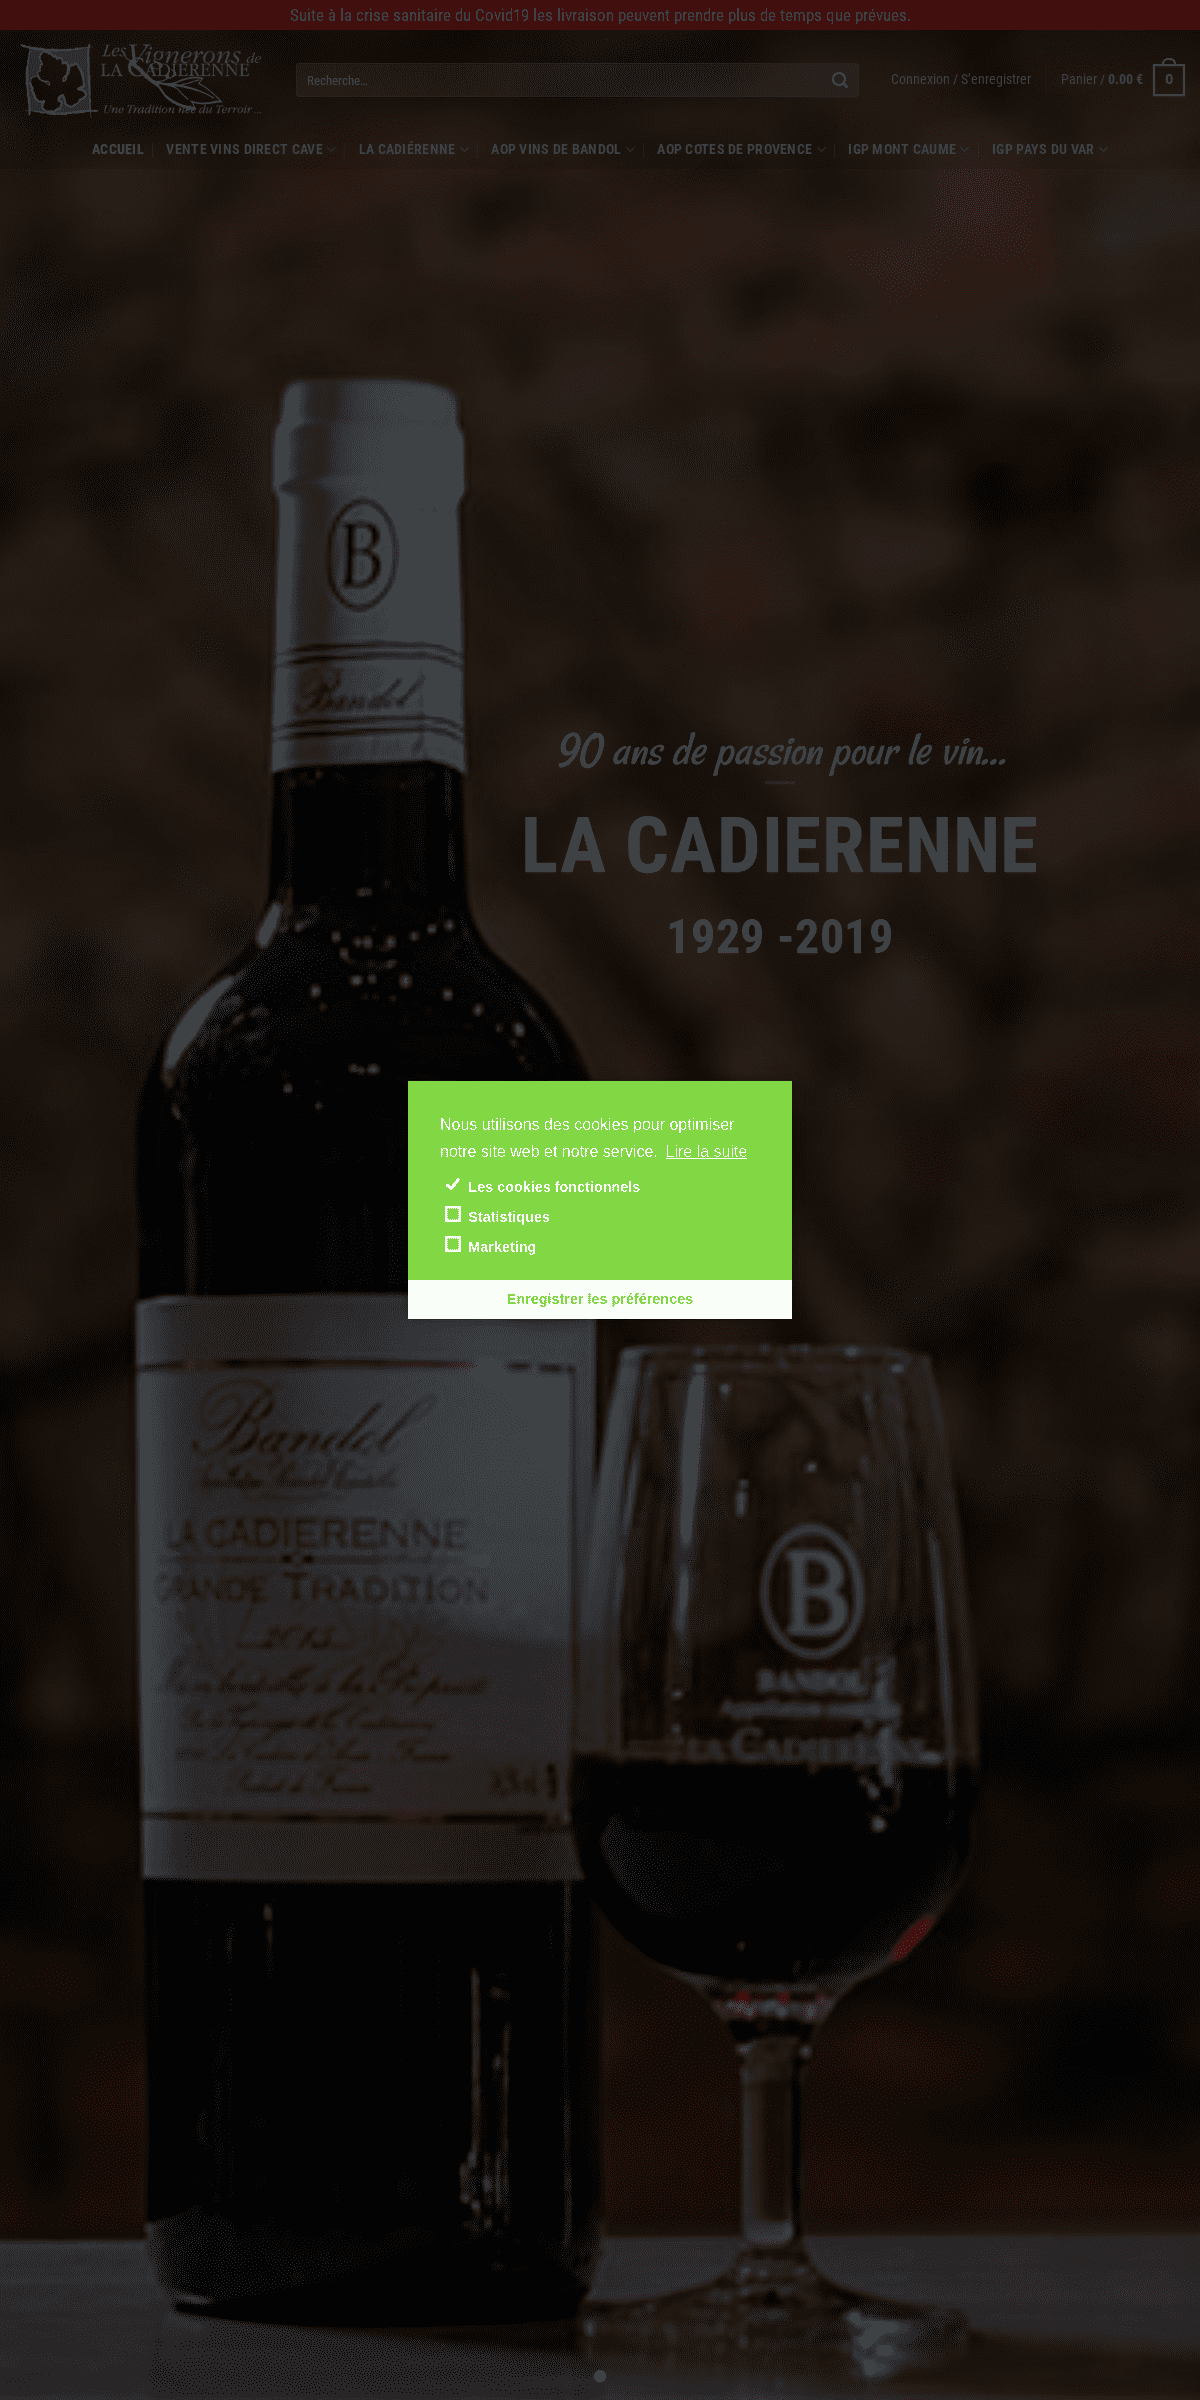 A complete backup of cadierenne.com